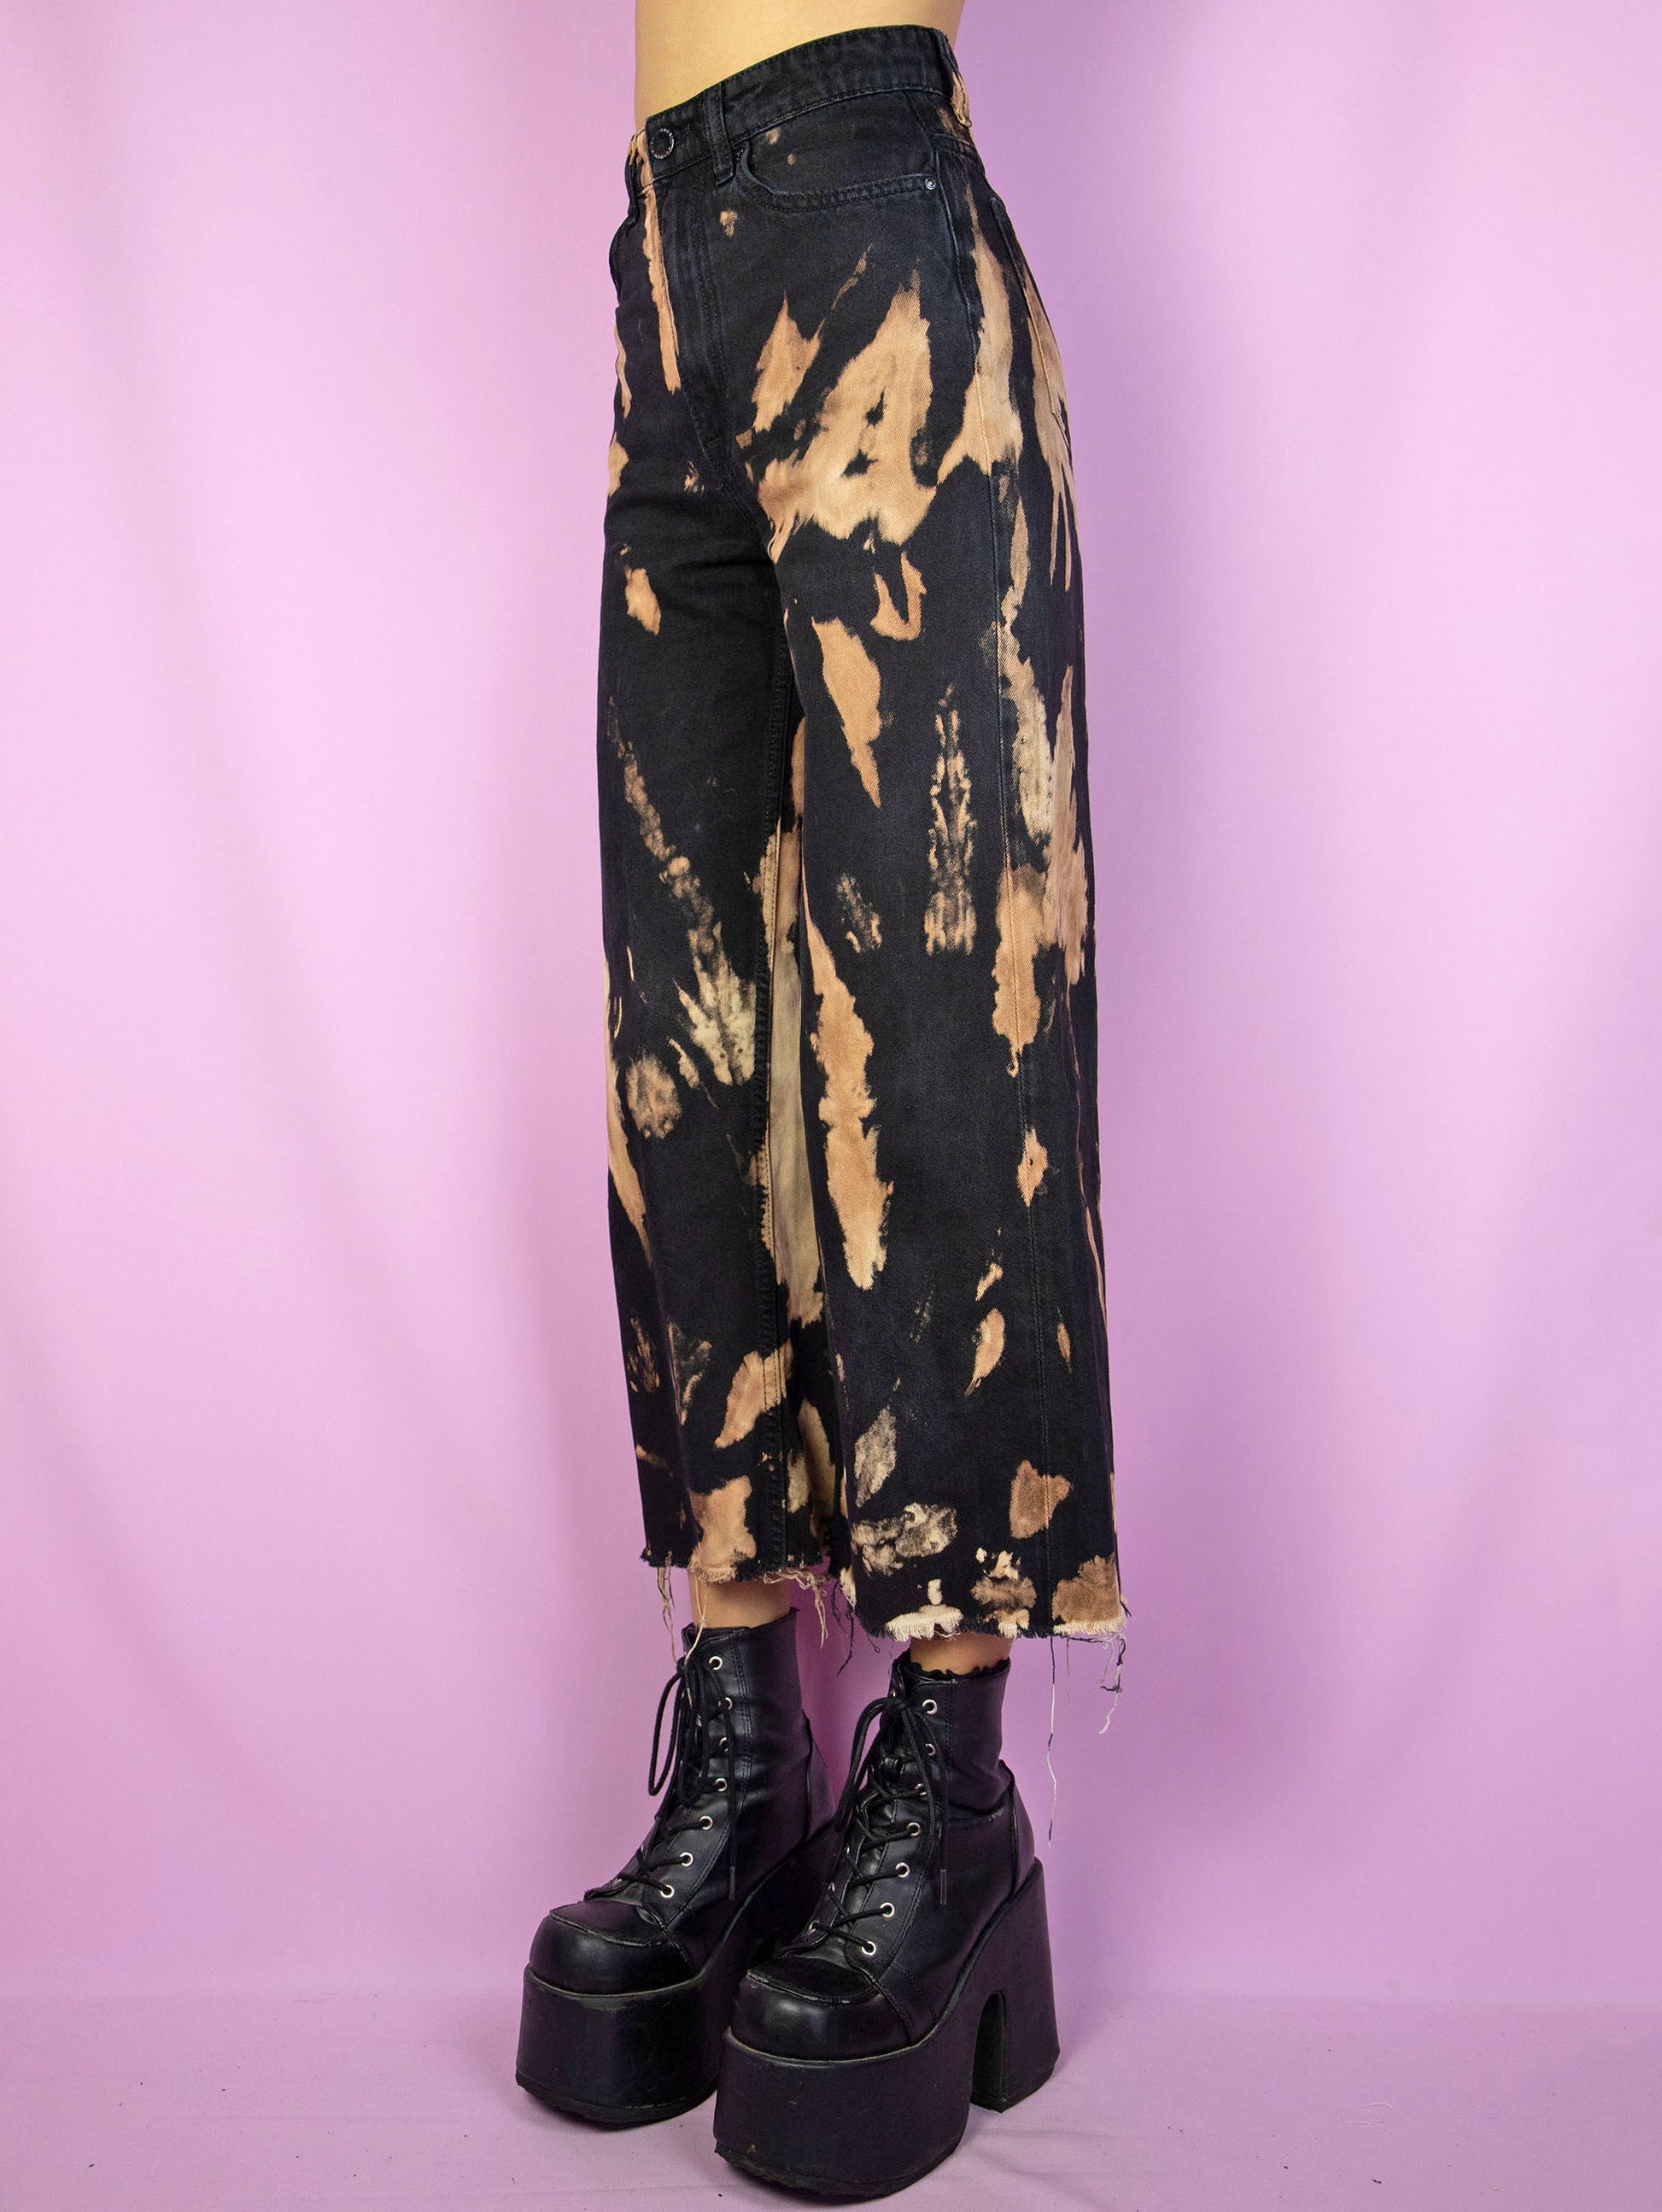 The Y2K Black Tie Dye Jeans are a vintage high waisted black bleached tie dye capri pants with a frayed hem. Cyber goth 2000s wide leg trousers.